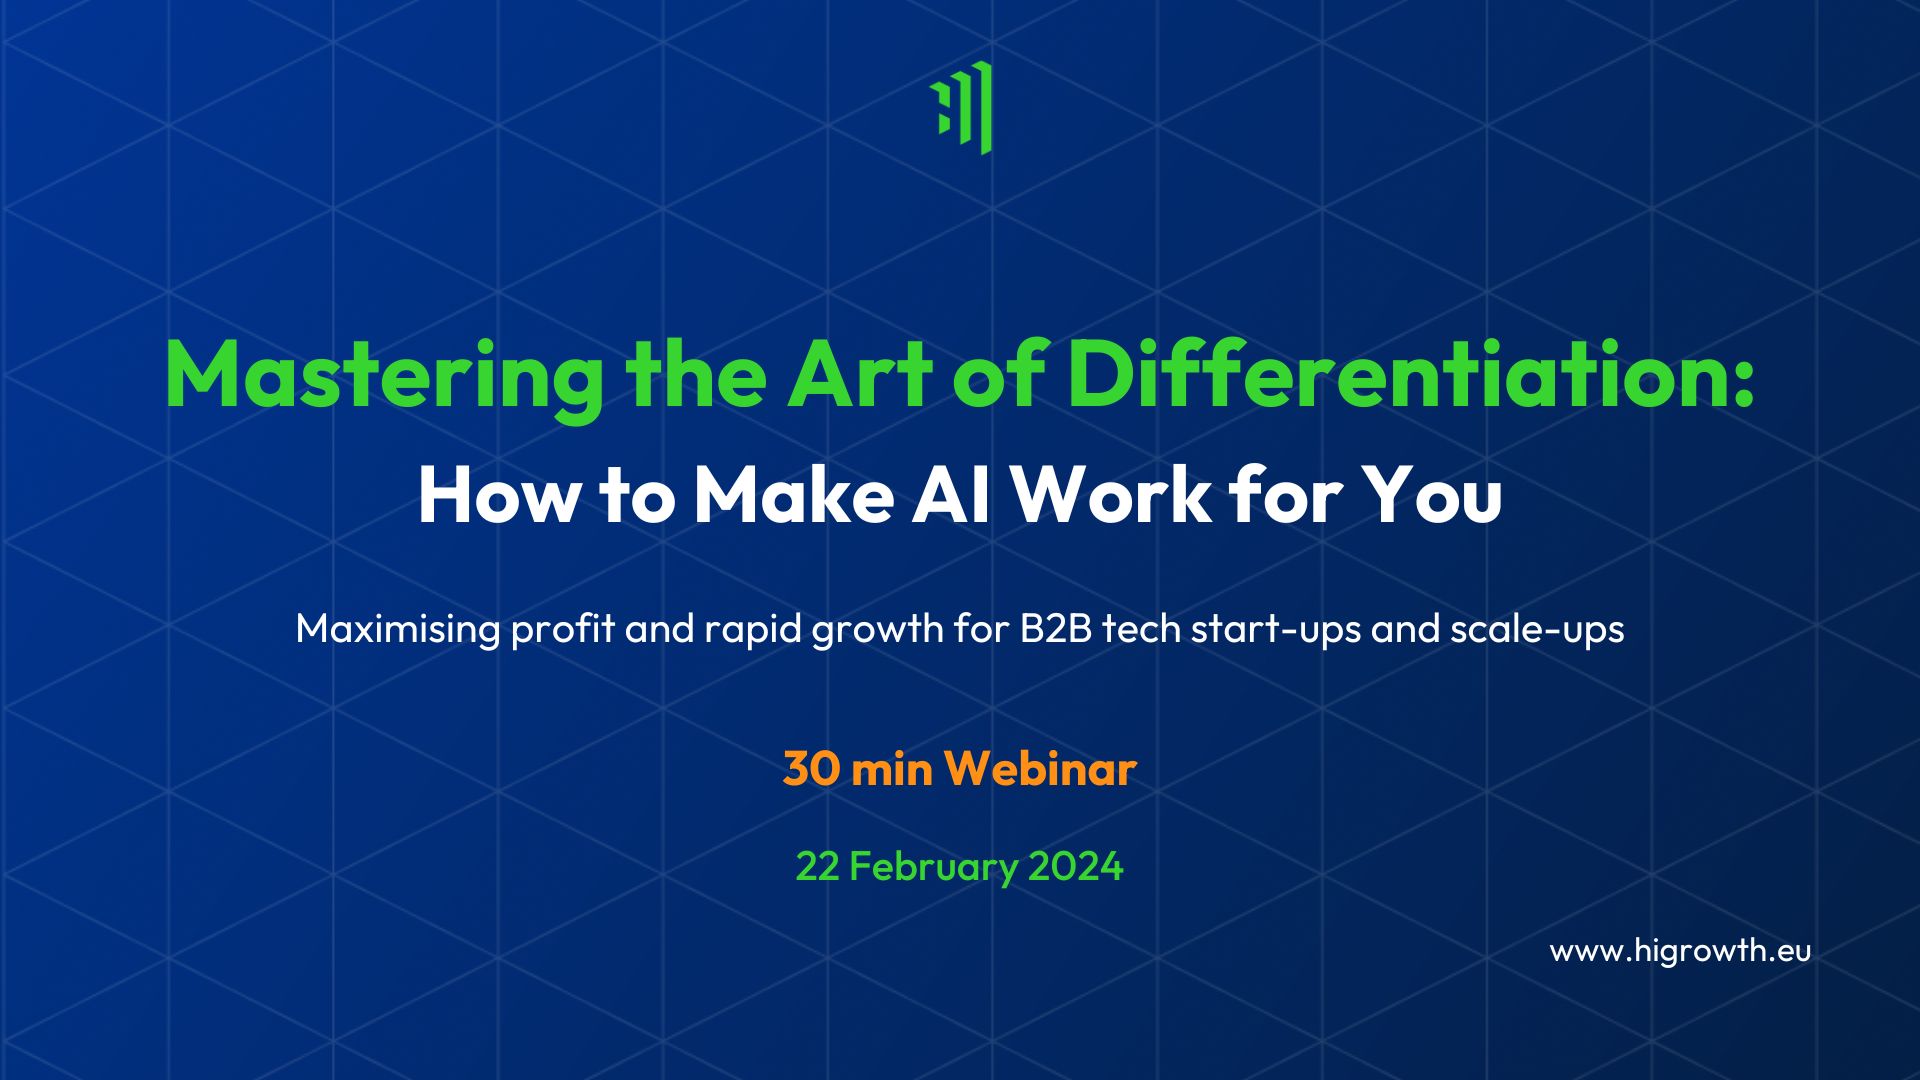 WEBINAR: Mastering the Art of Differentiation: How to Make AI Work for You